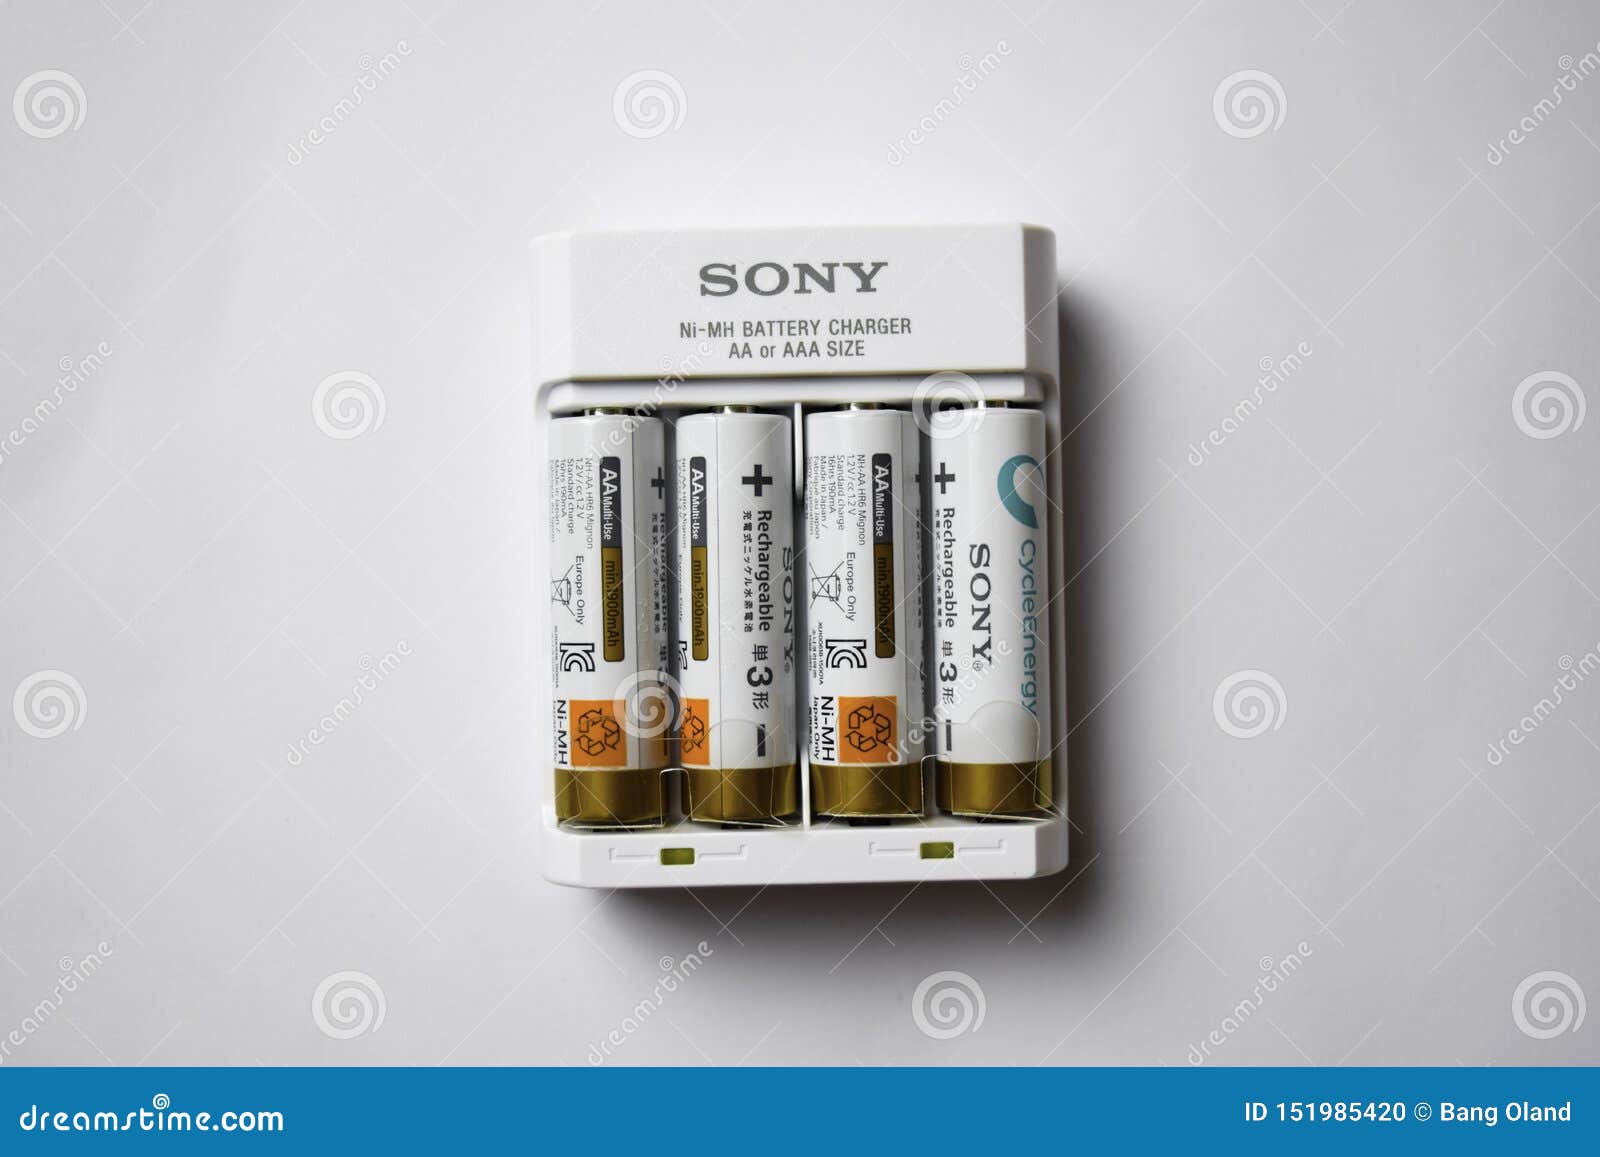 SONY Ni-MH BATTERY CHARGER AA or AAA SIZE with Batteries. SONY Ni-MH  BATTERY CHARGER is a Developed by SONY Editorial Image - Image of  electricity, accessory: 151985420